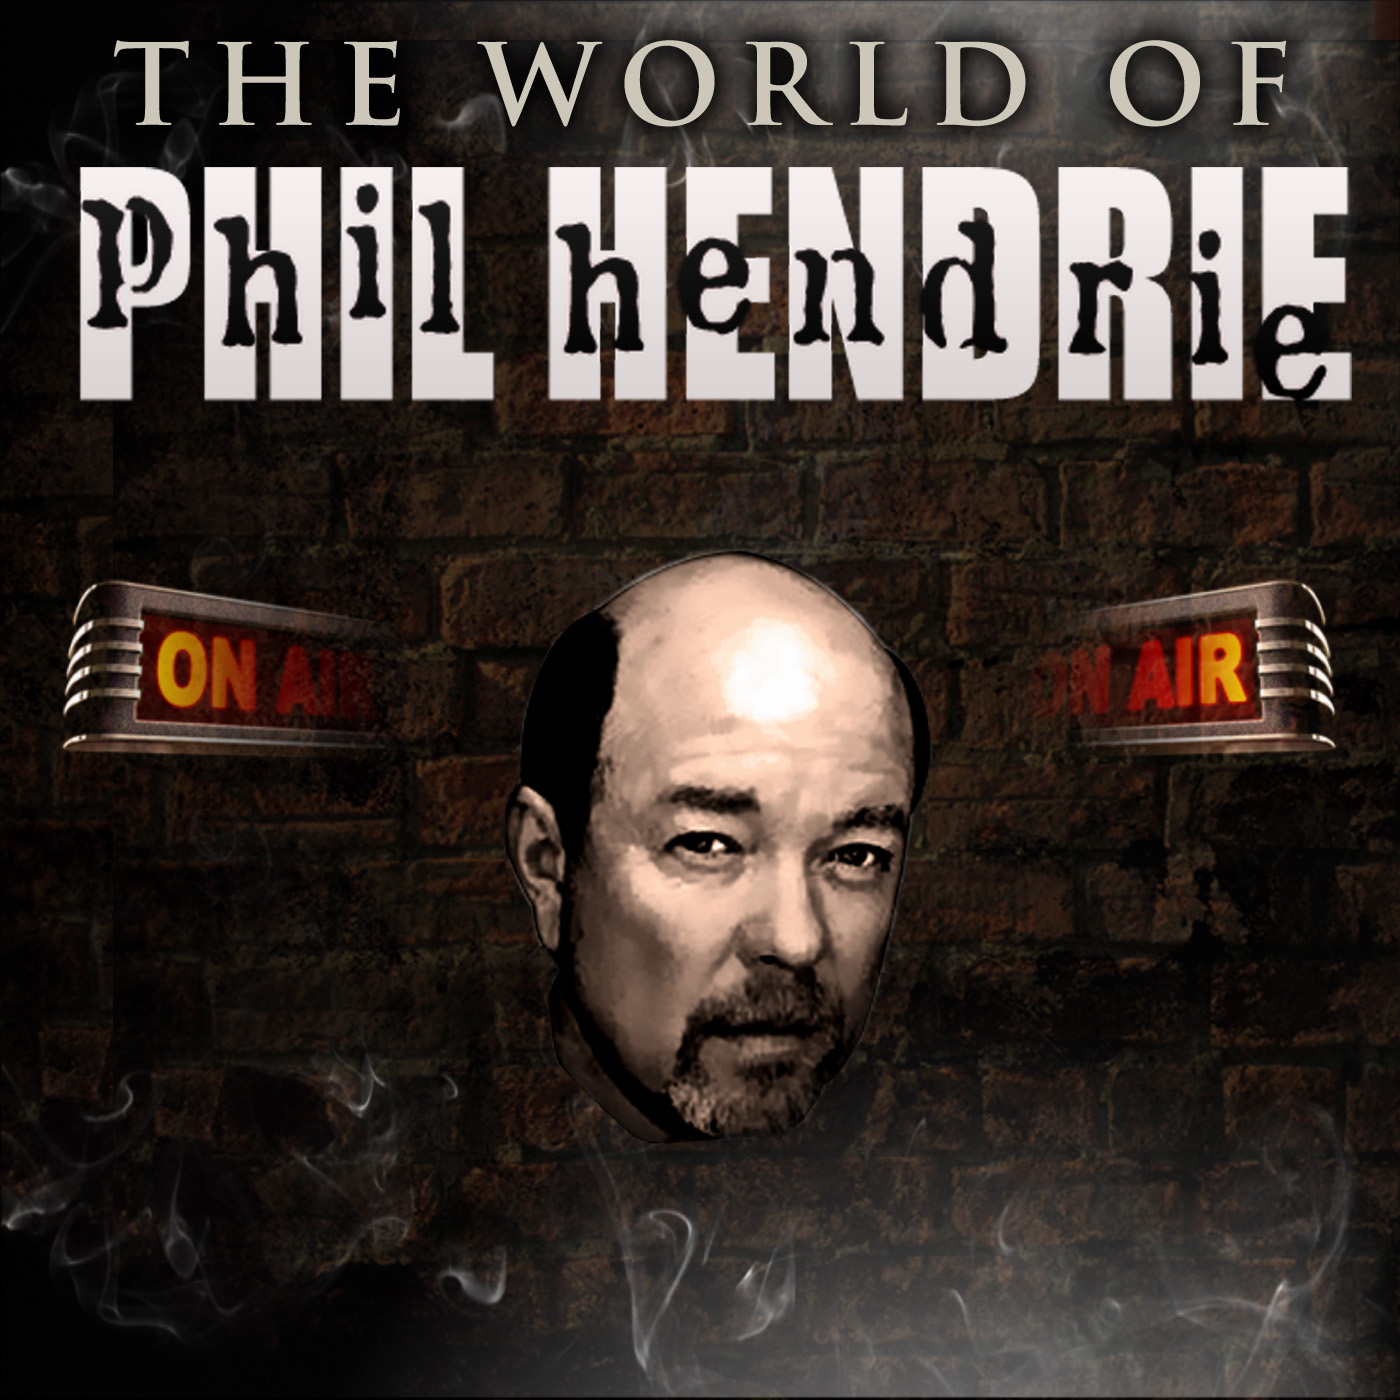 The World of Phil Hendrie Promo Codes | Podcast Promo Codes